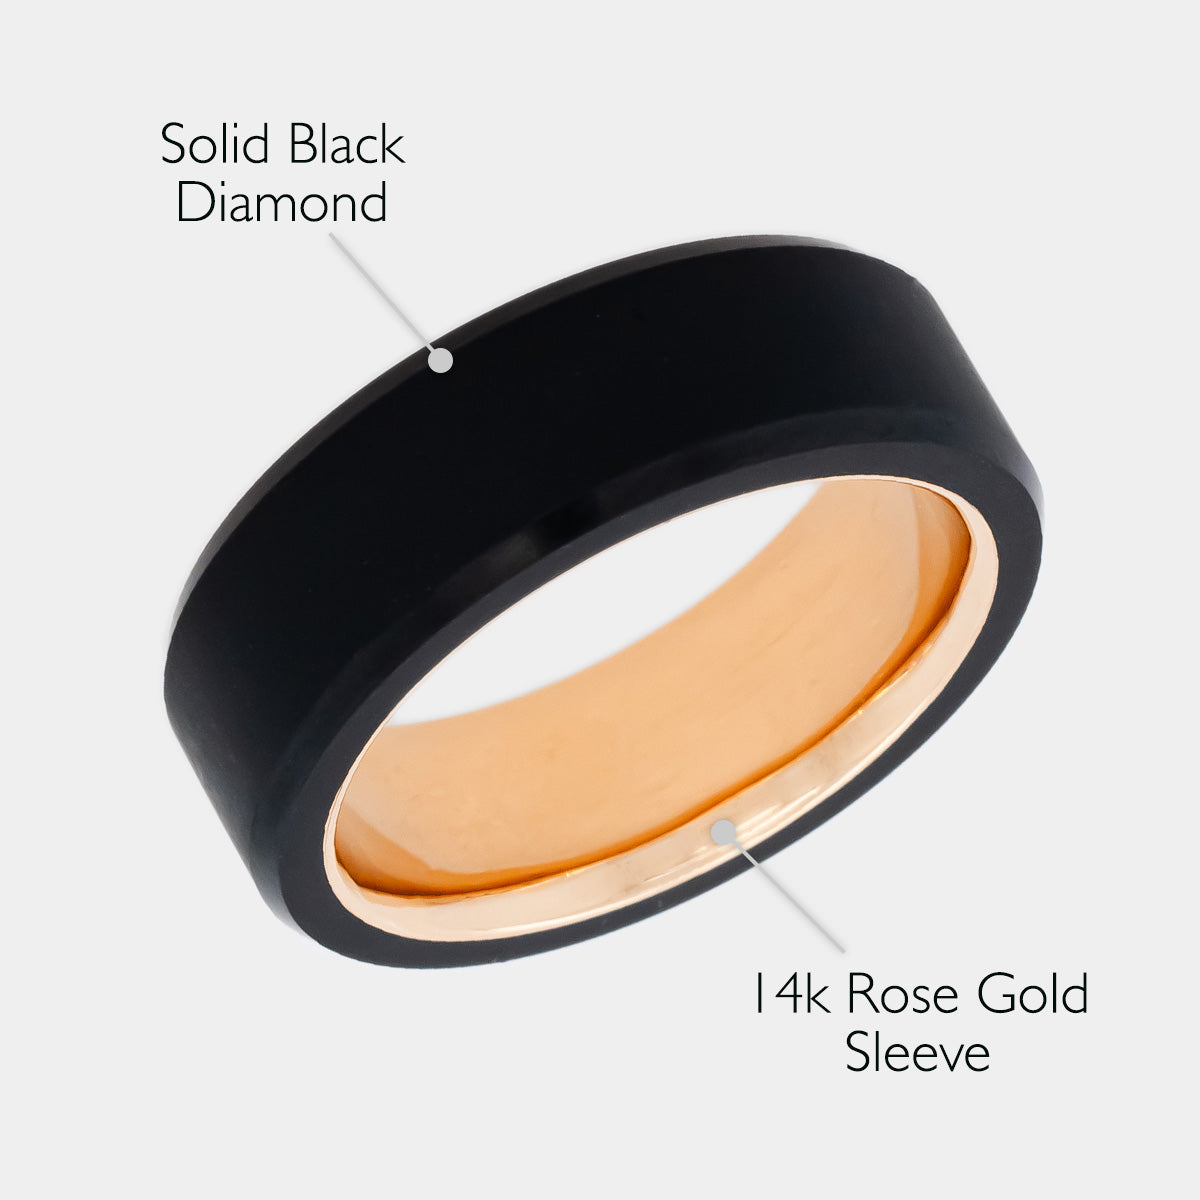 ARES 8mm - Size 7.5 - Satin Finish - 14k Rose Gold Sleeve - SHIPS WITHIN 2 BUSINESS DAYS